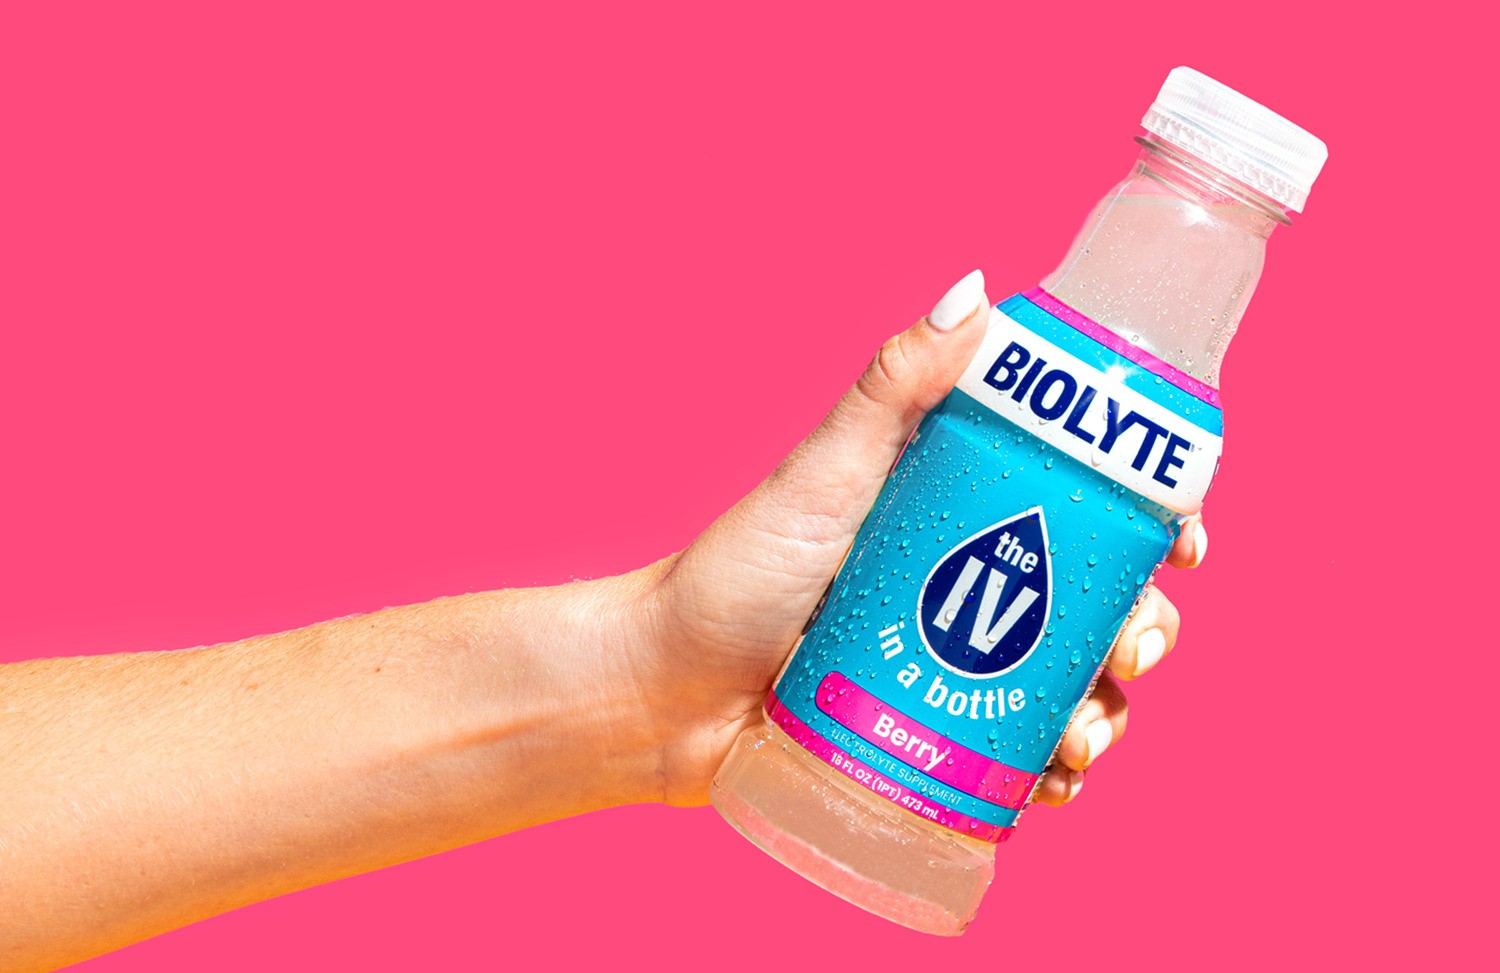 BIOLYTE, the First IV in a Bottle For National Hydration Day